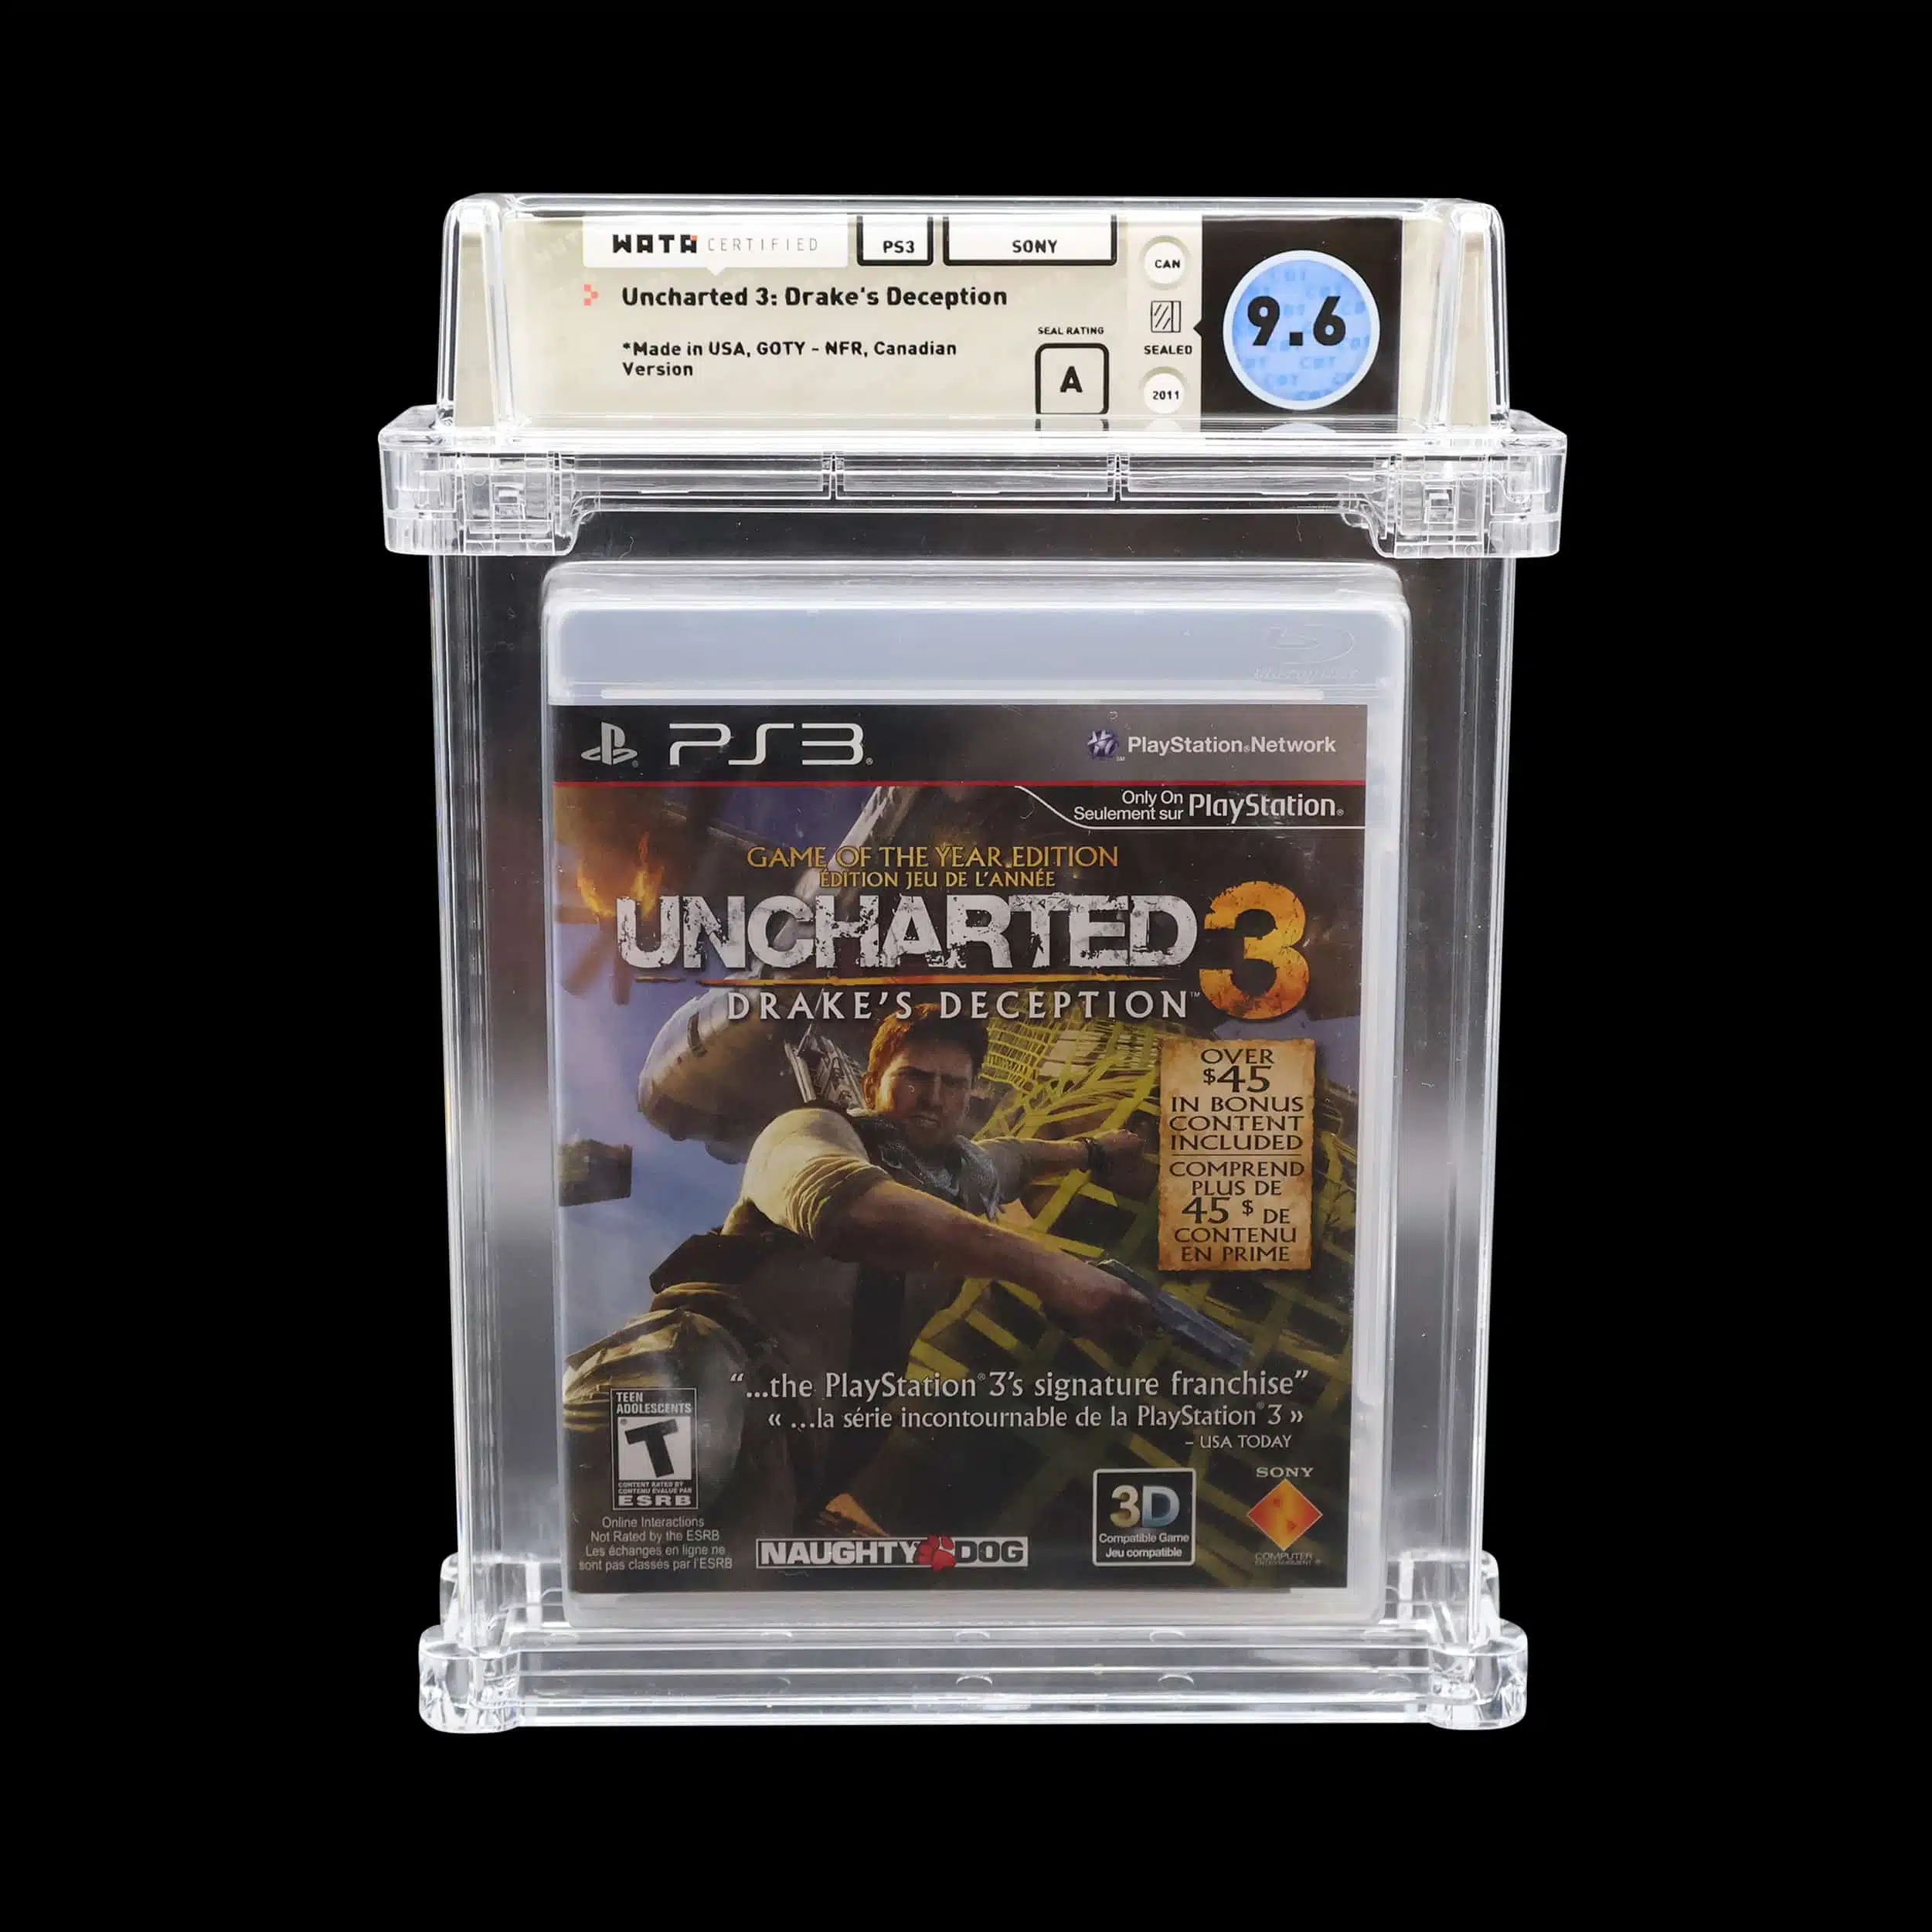 Factory-sealed Uncharted 3 PS3 game with WATA 9.6 grade and A seal rating.